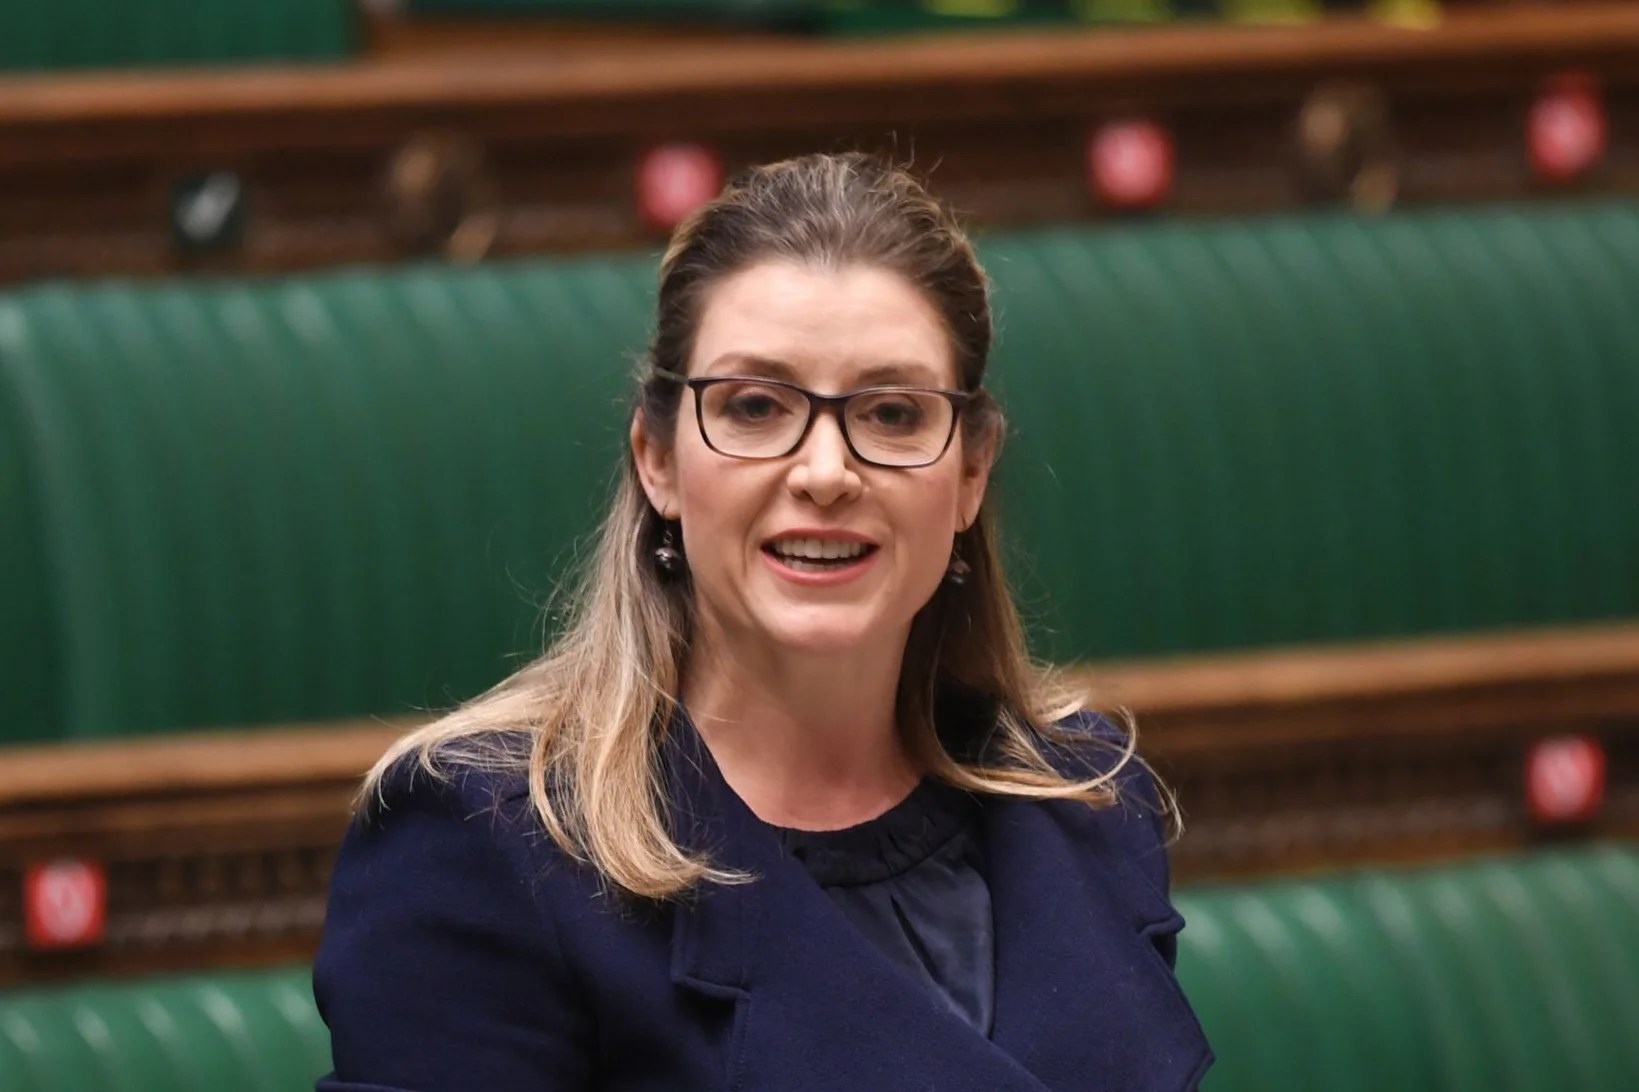 Who is Penny Mordaunt? What is her background on Brexit, trans rights